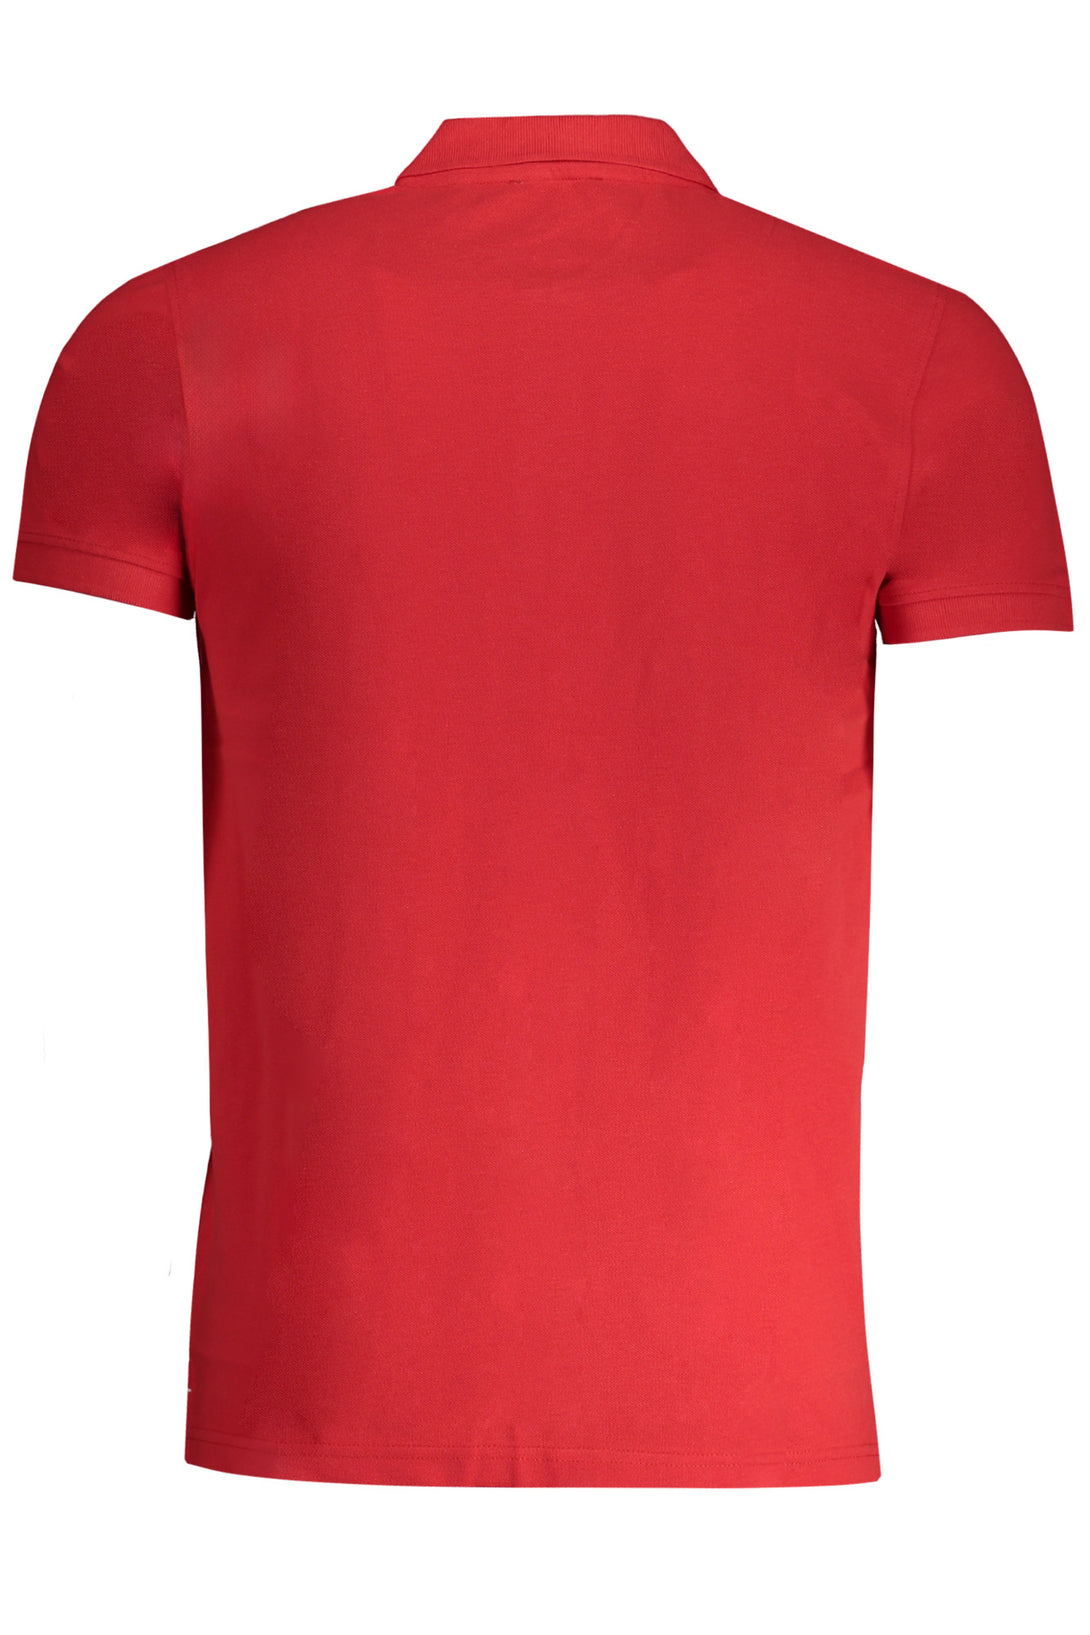 cavalli-class-polo-homme-rouge-30272